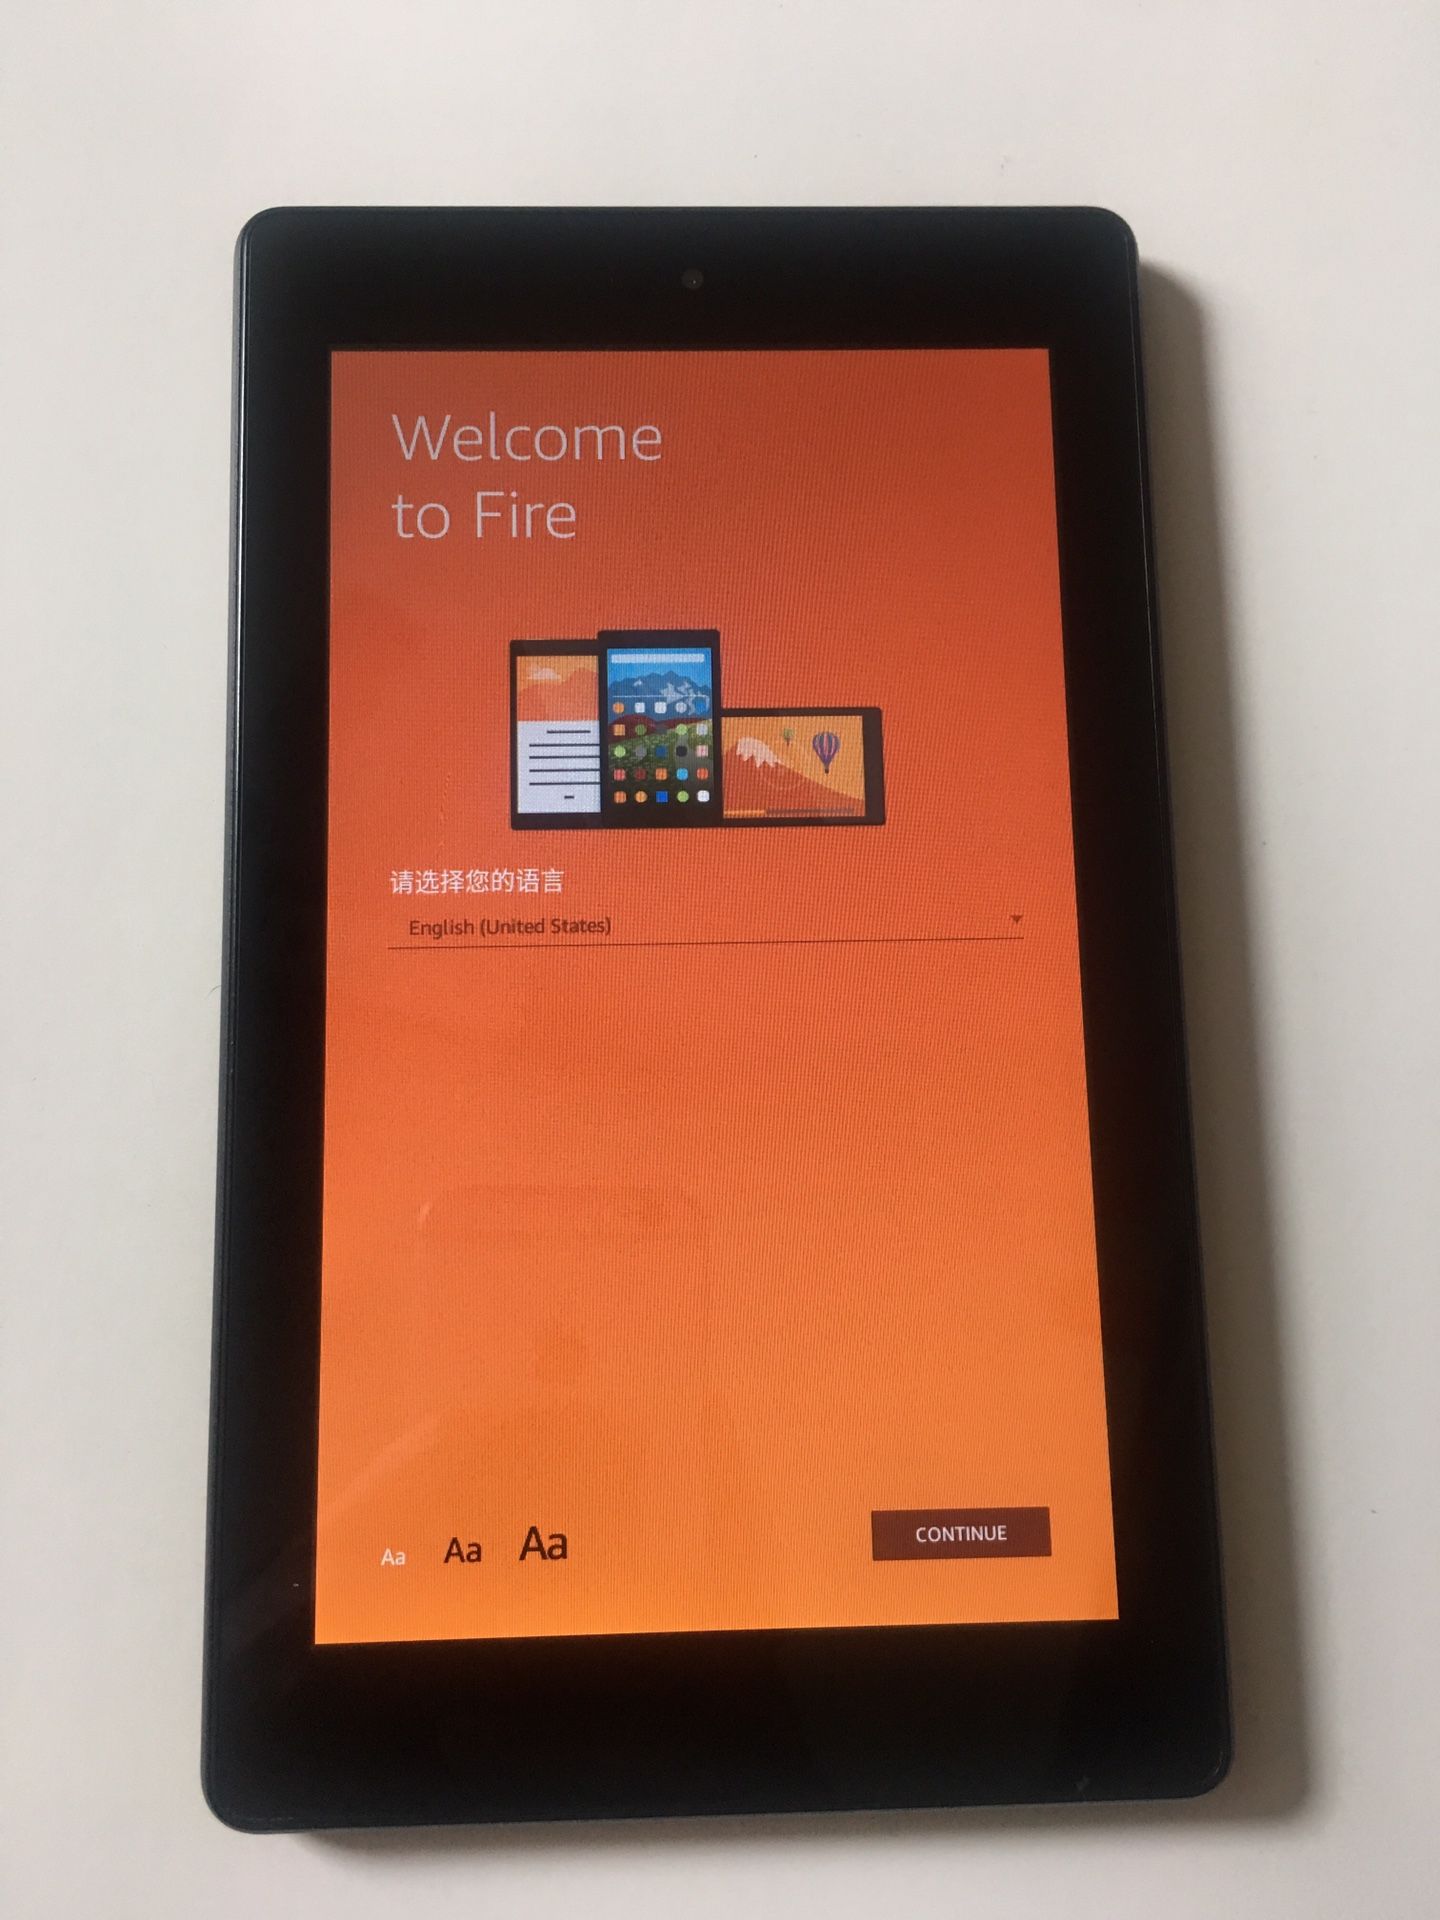 Amazon Fire 7 8gb tablet with Alexa 7th gen Kindle fire HD7